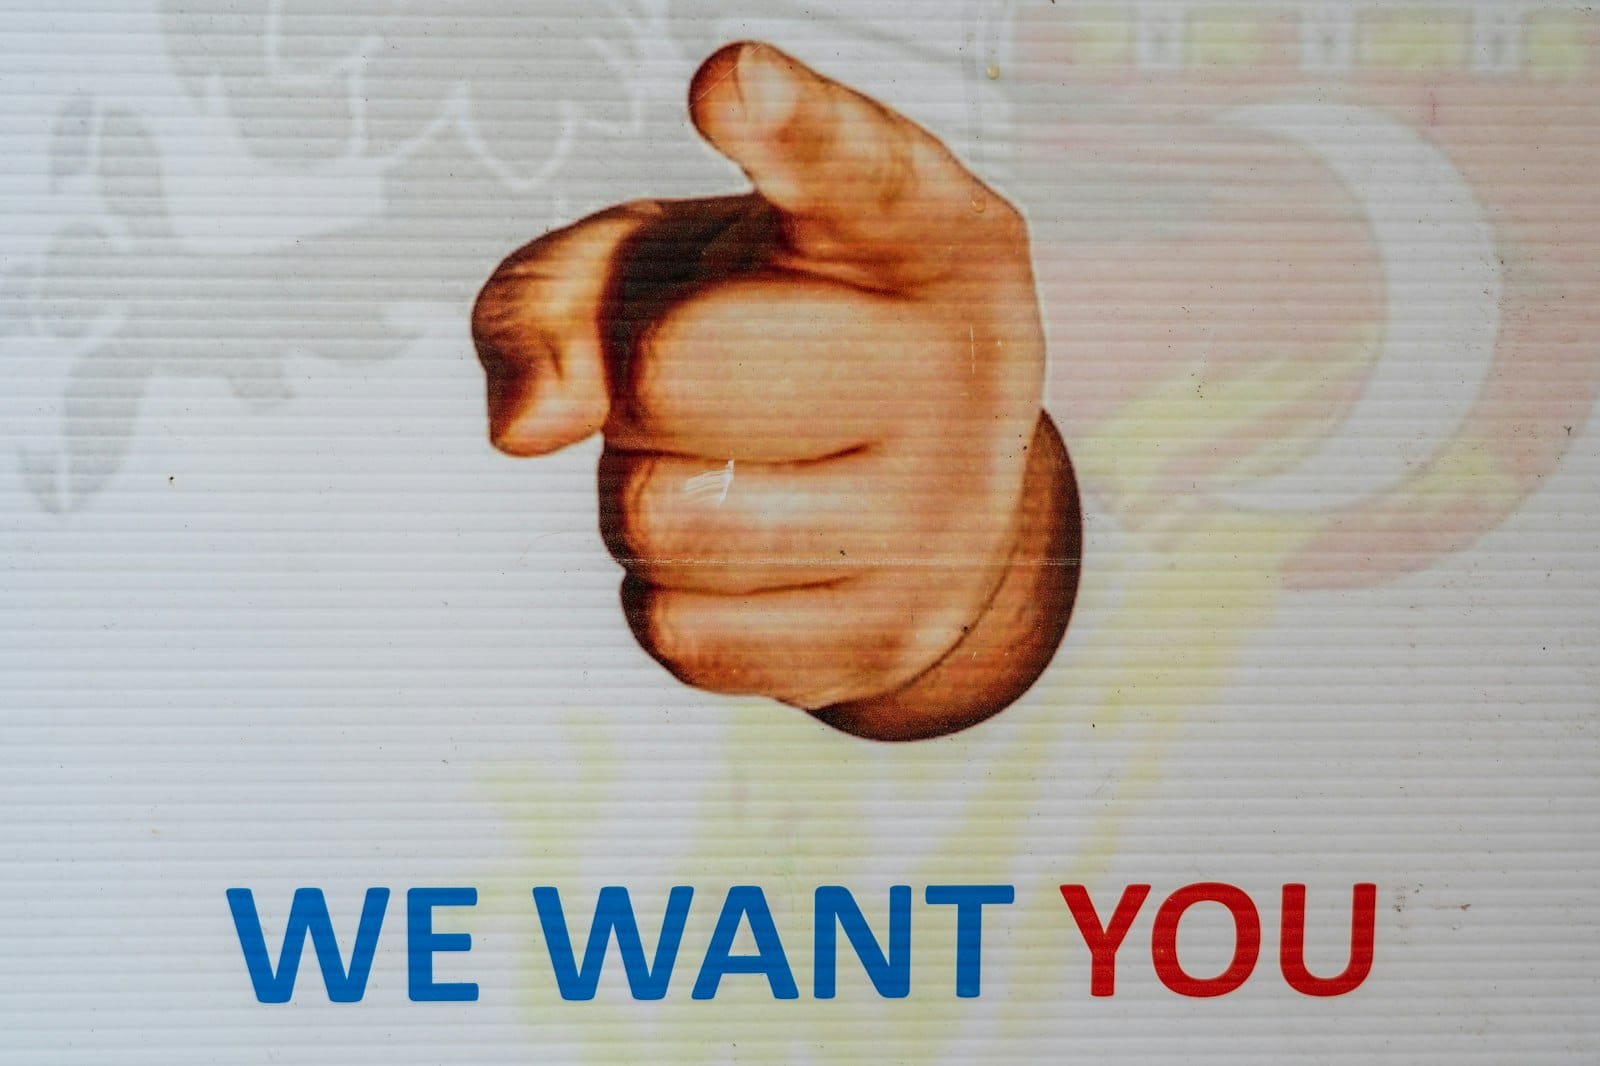 Advertisement with a pointing finger that says, "WE WANT YOU".